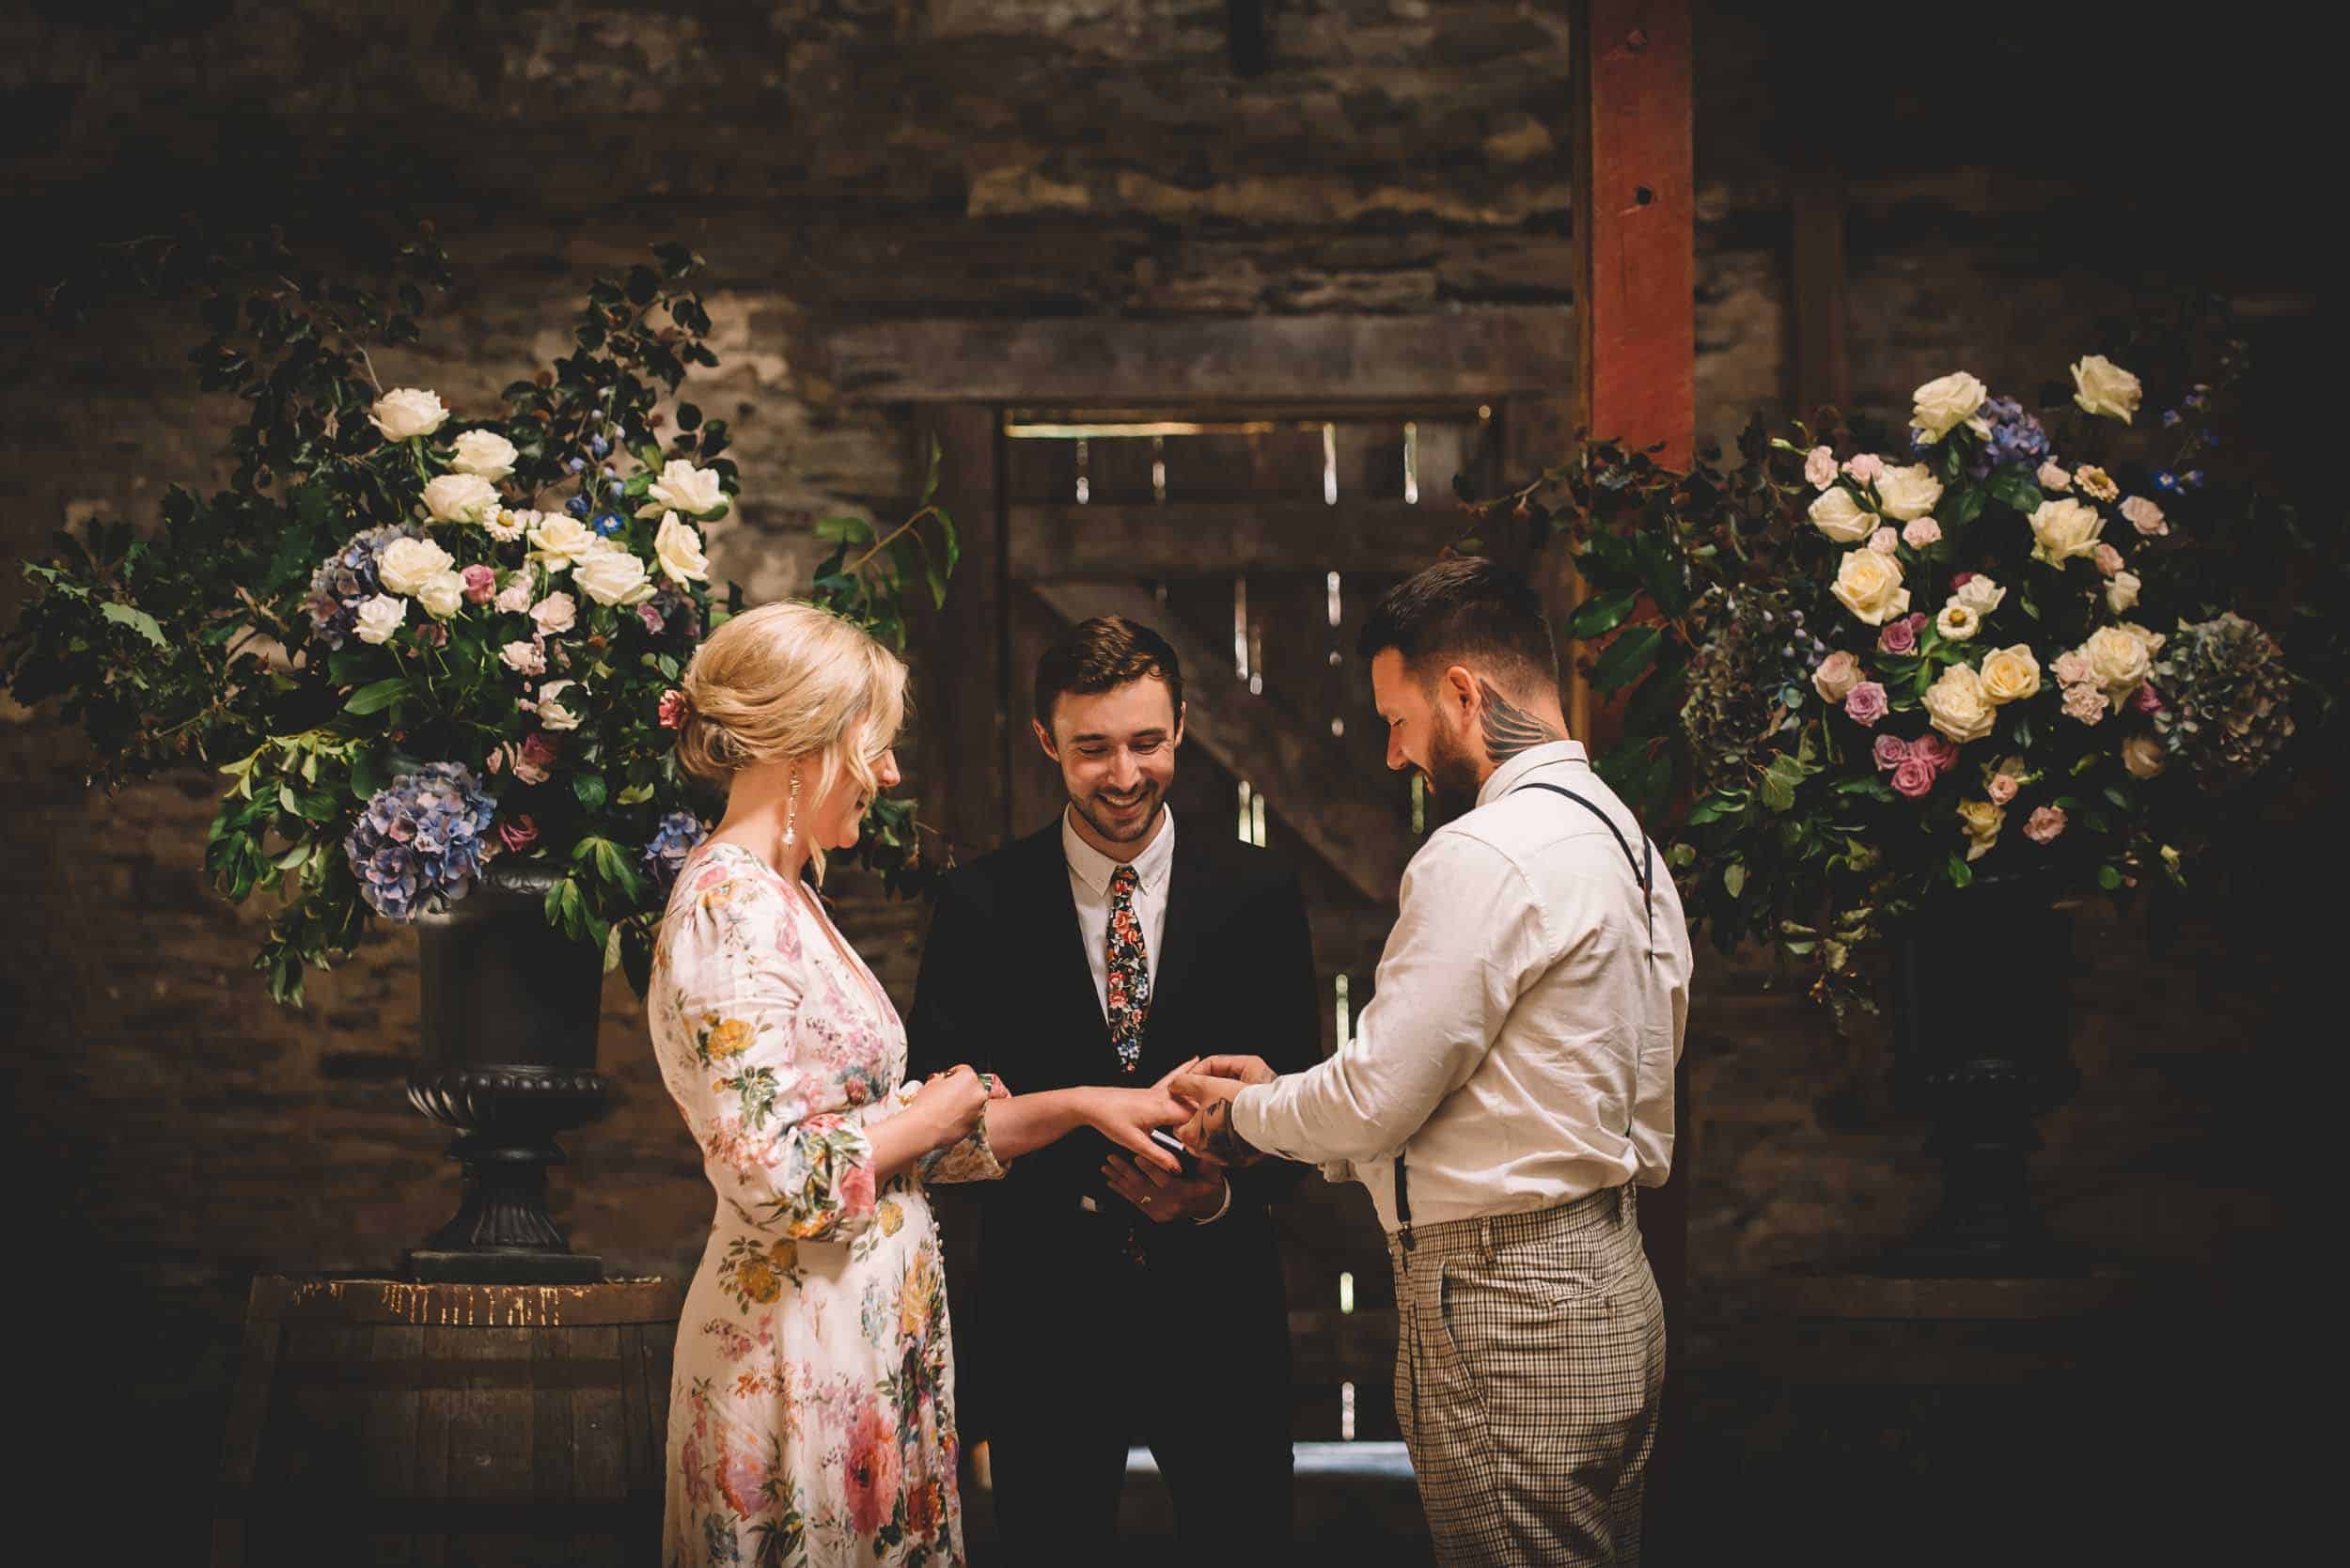 Nick & Nina's Thurlby Domain Elopement old stone stables wedding ceremony exchanging rings